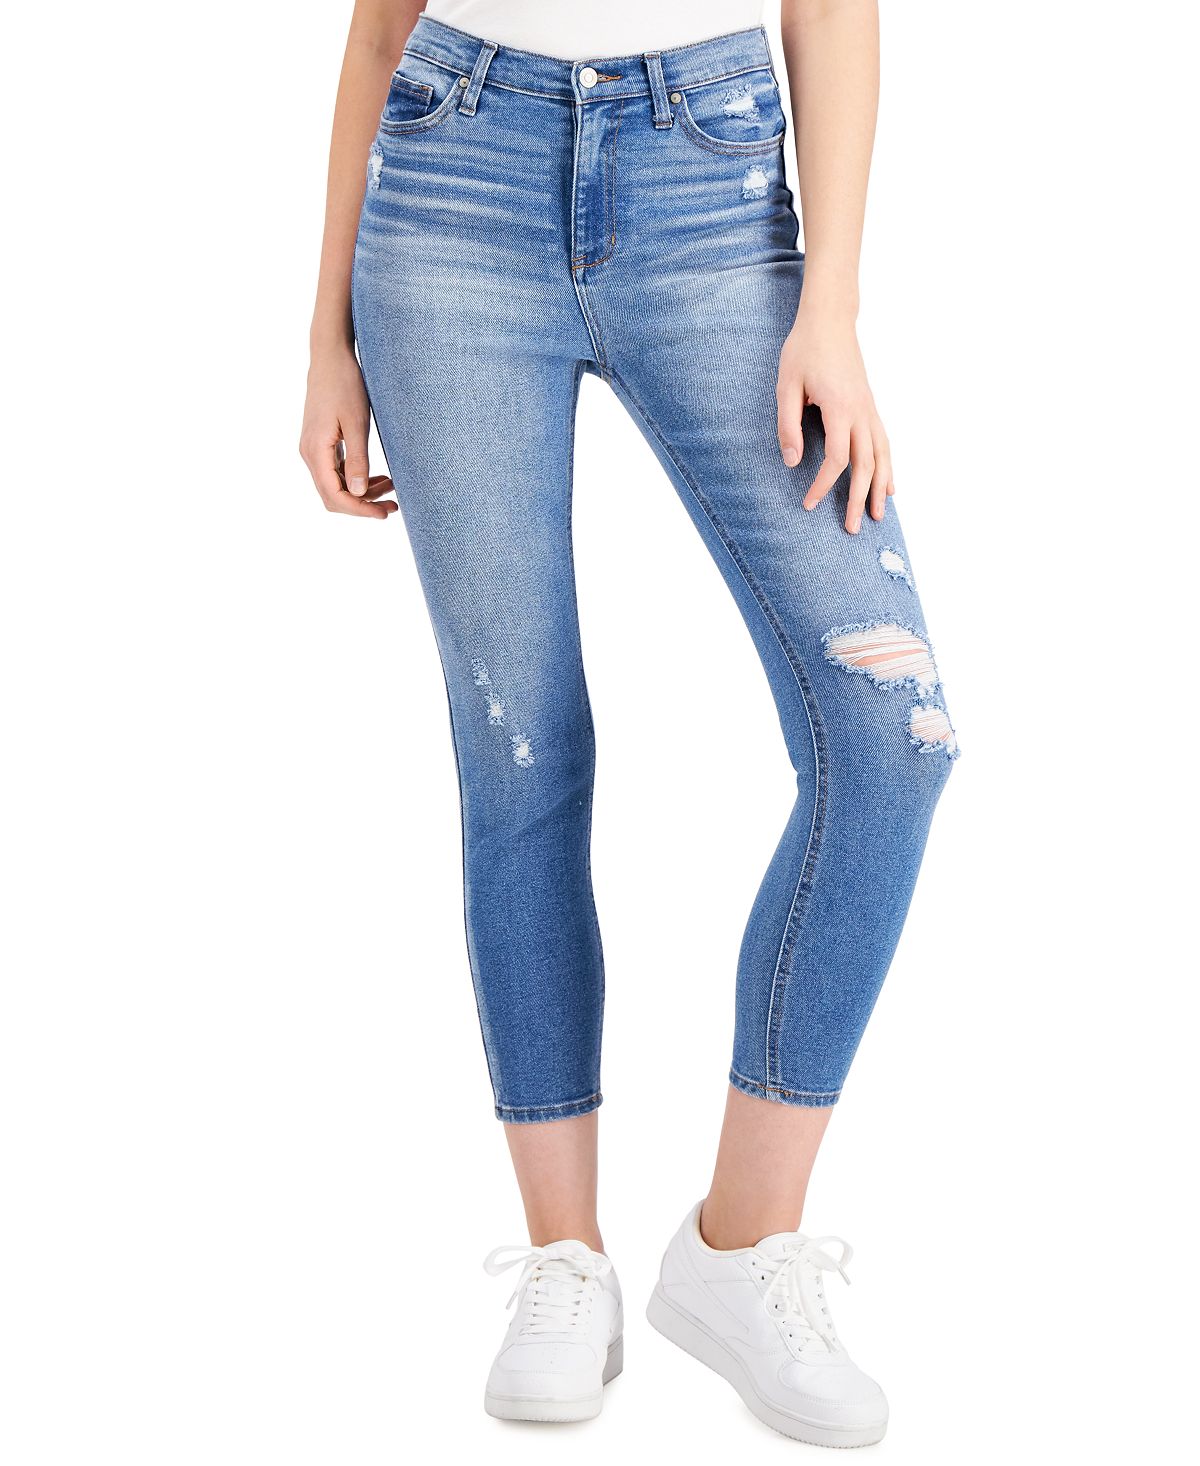 Celebrity Pink Juniors' High-rise Skinny Ankle Jeans Save The Day